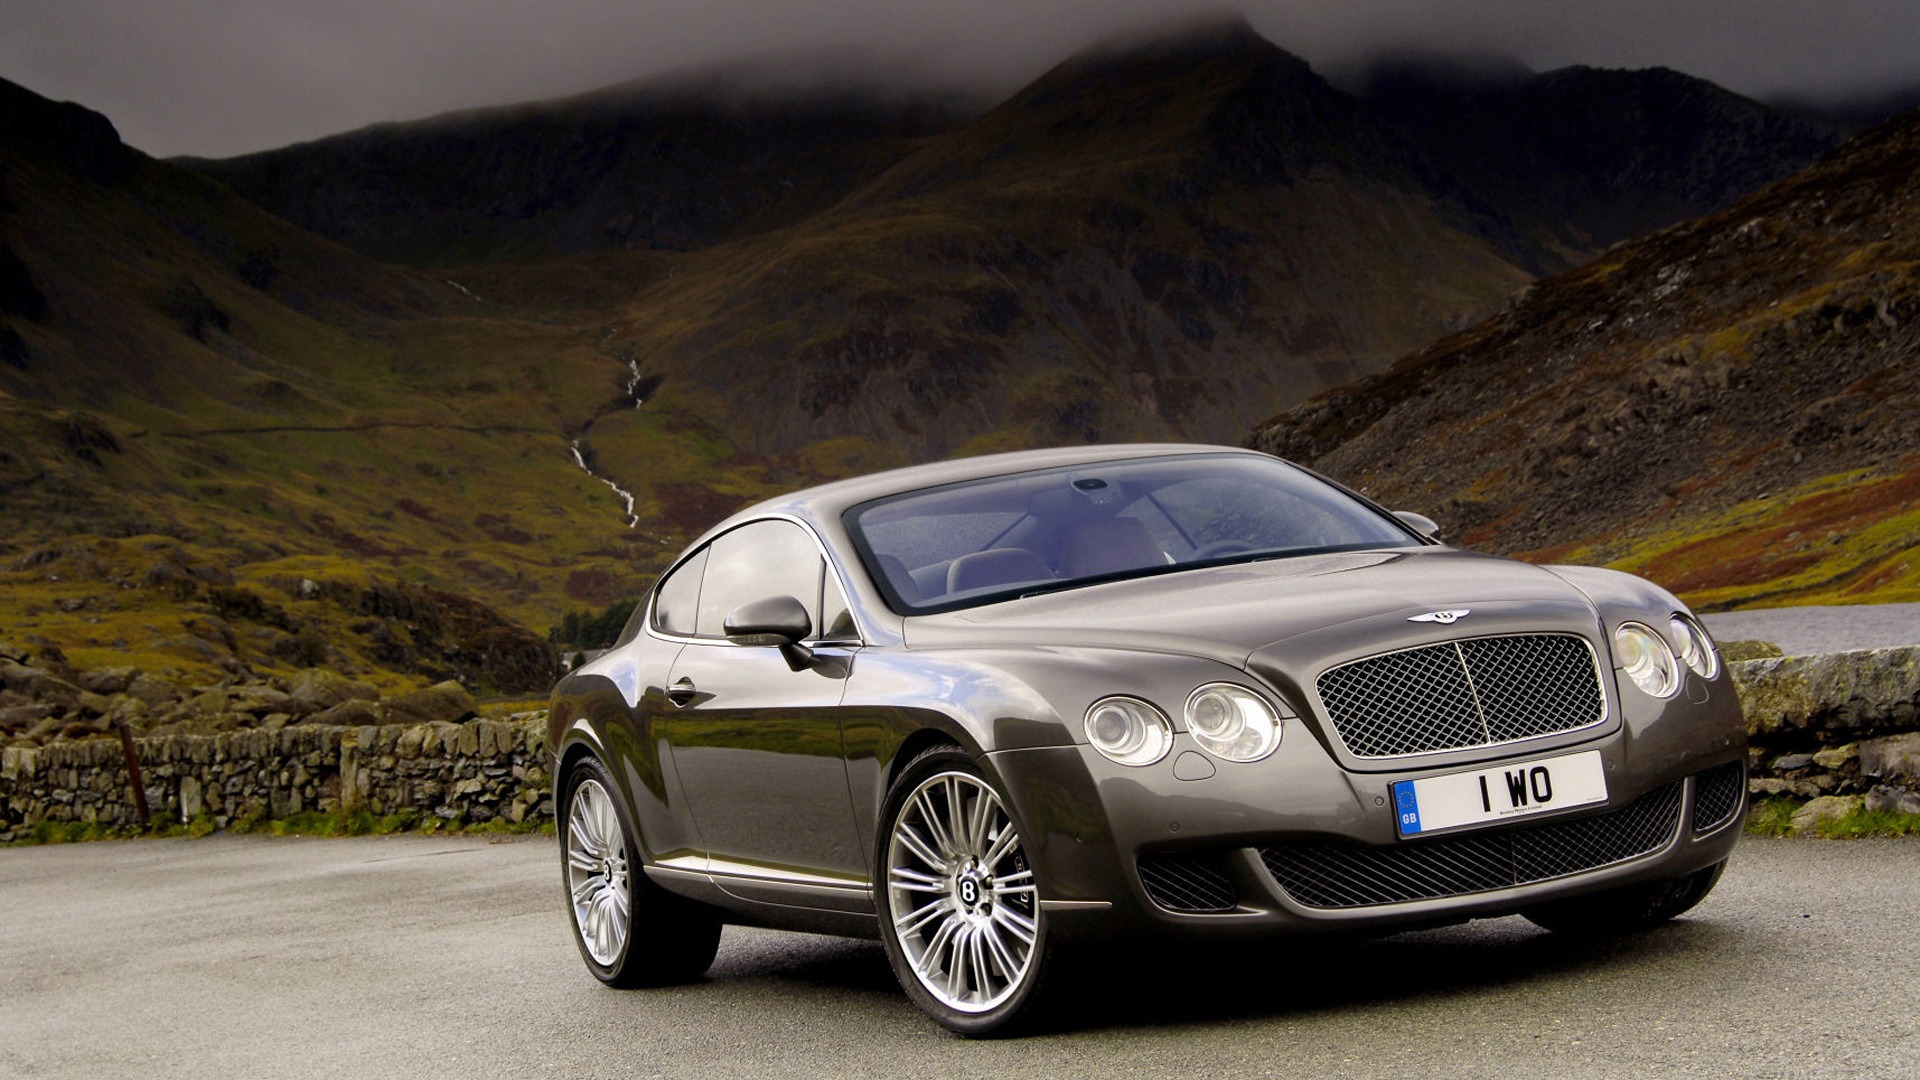 Bentley Continental Front Angle for 1920 x 1080 HDTV 1080p resolution